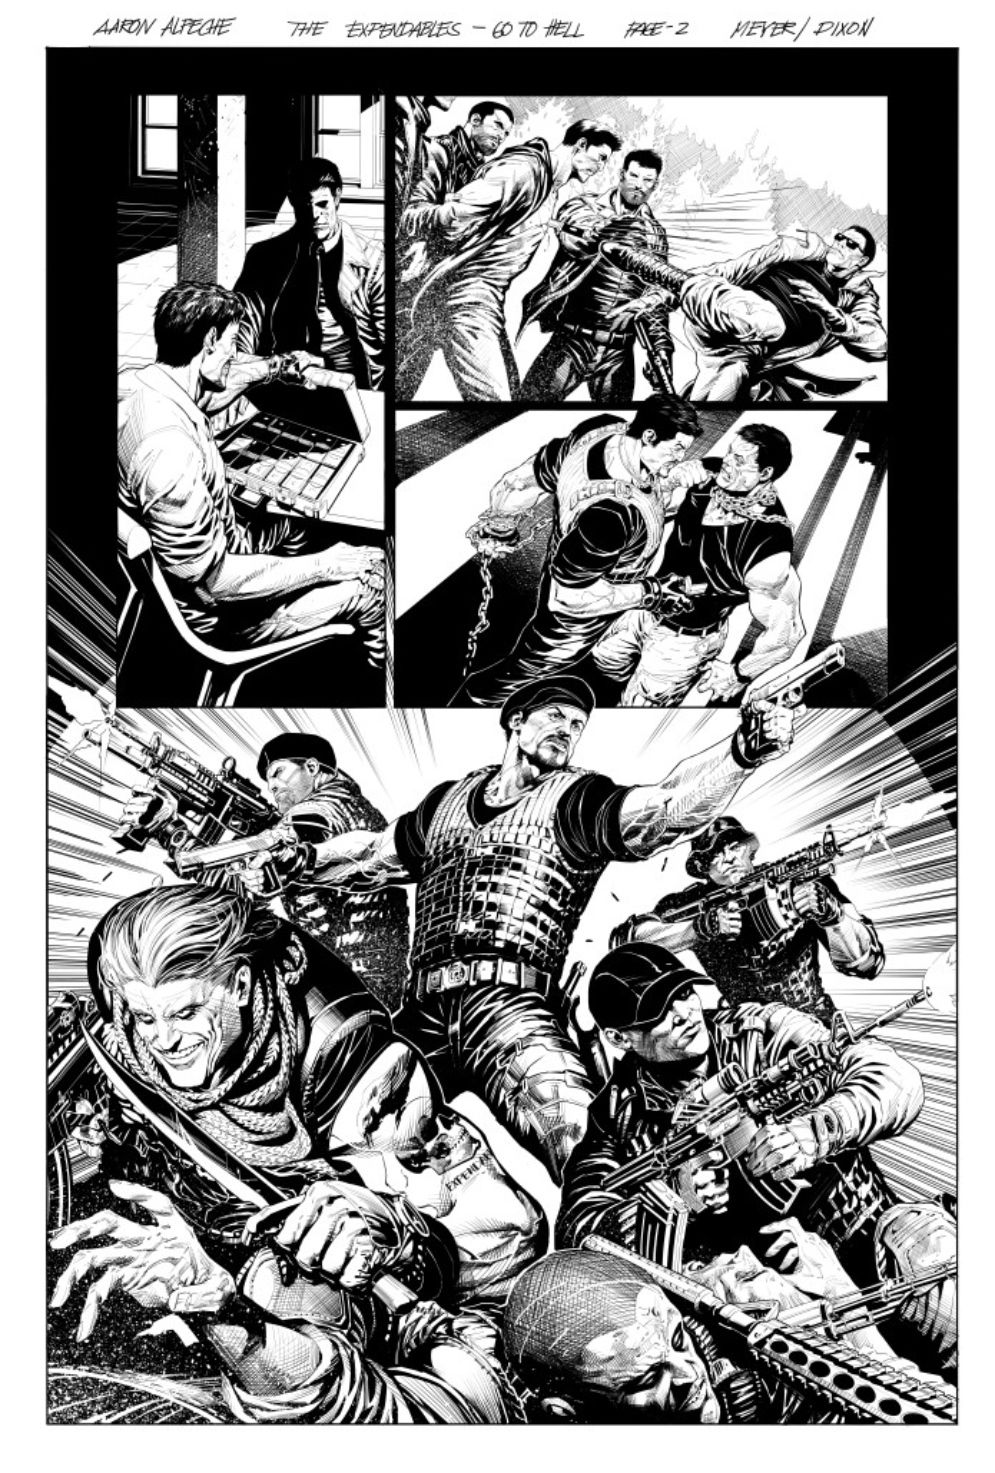 The Expendables Go To Hell Graphic Novel Page 2